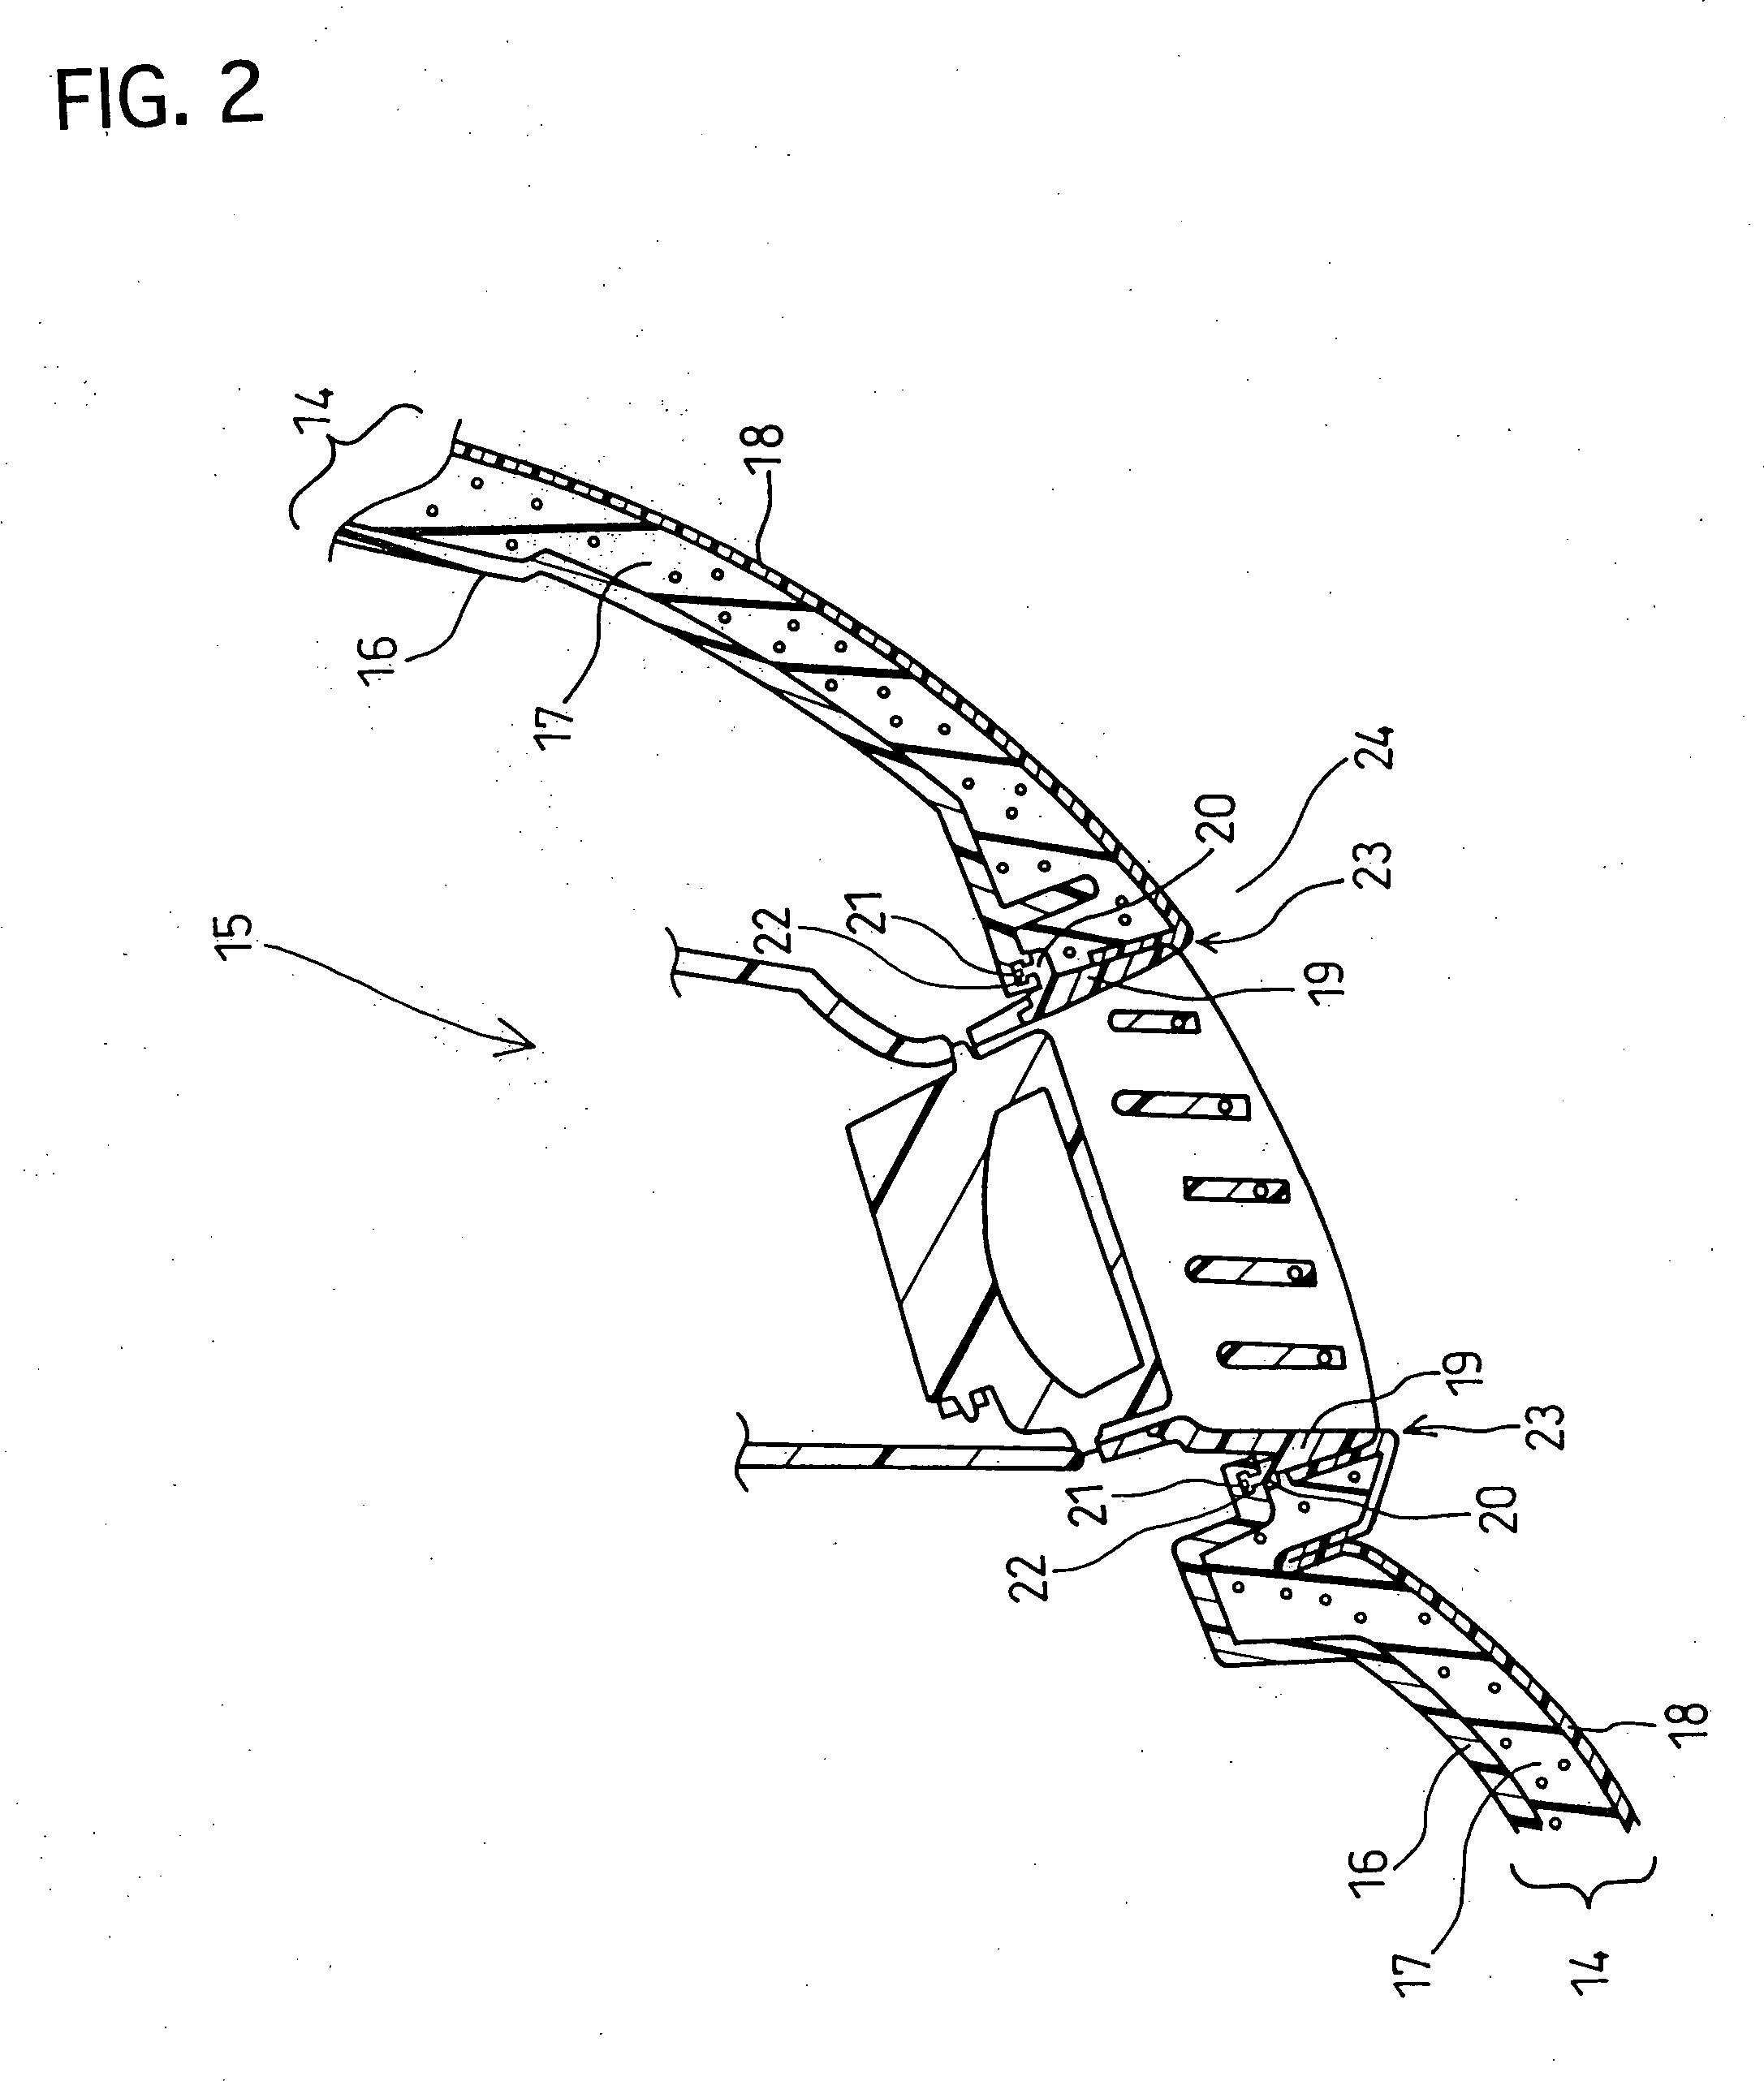 Molded product and process for manufacturing the same